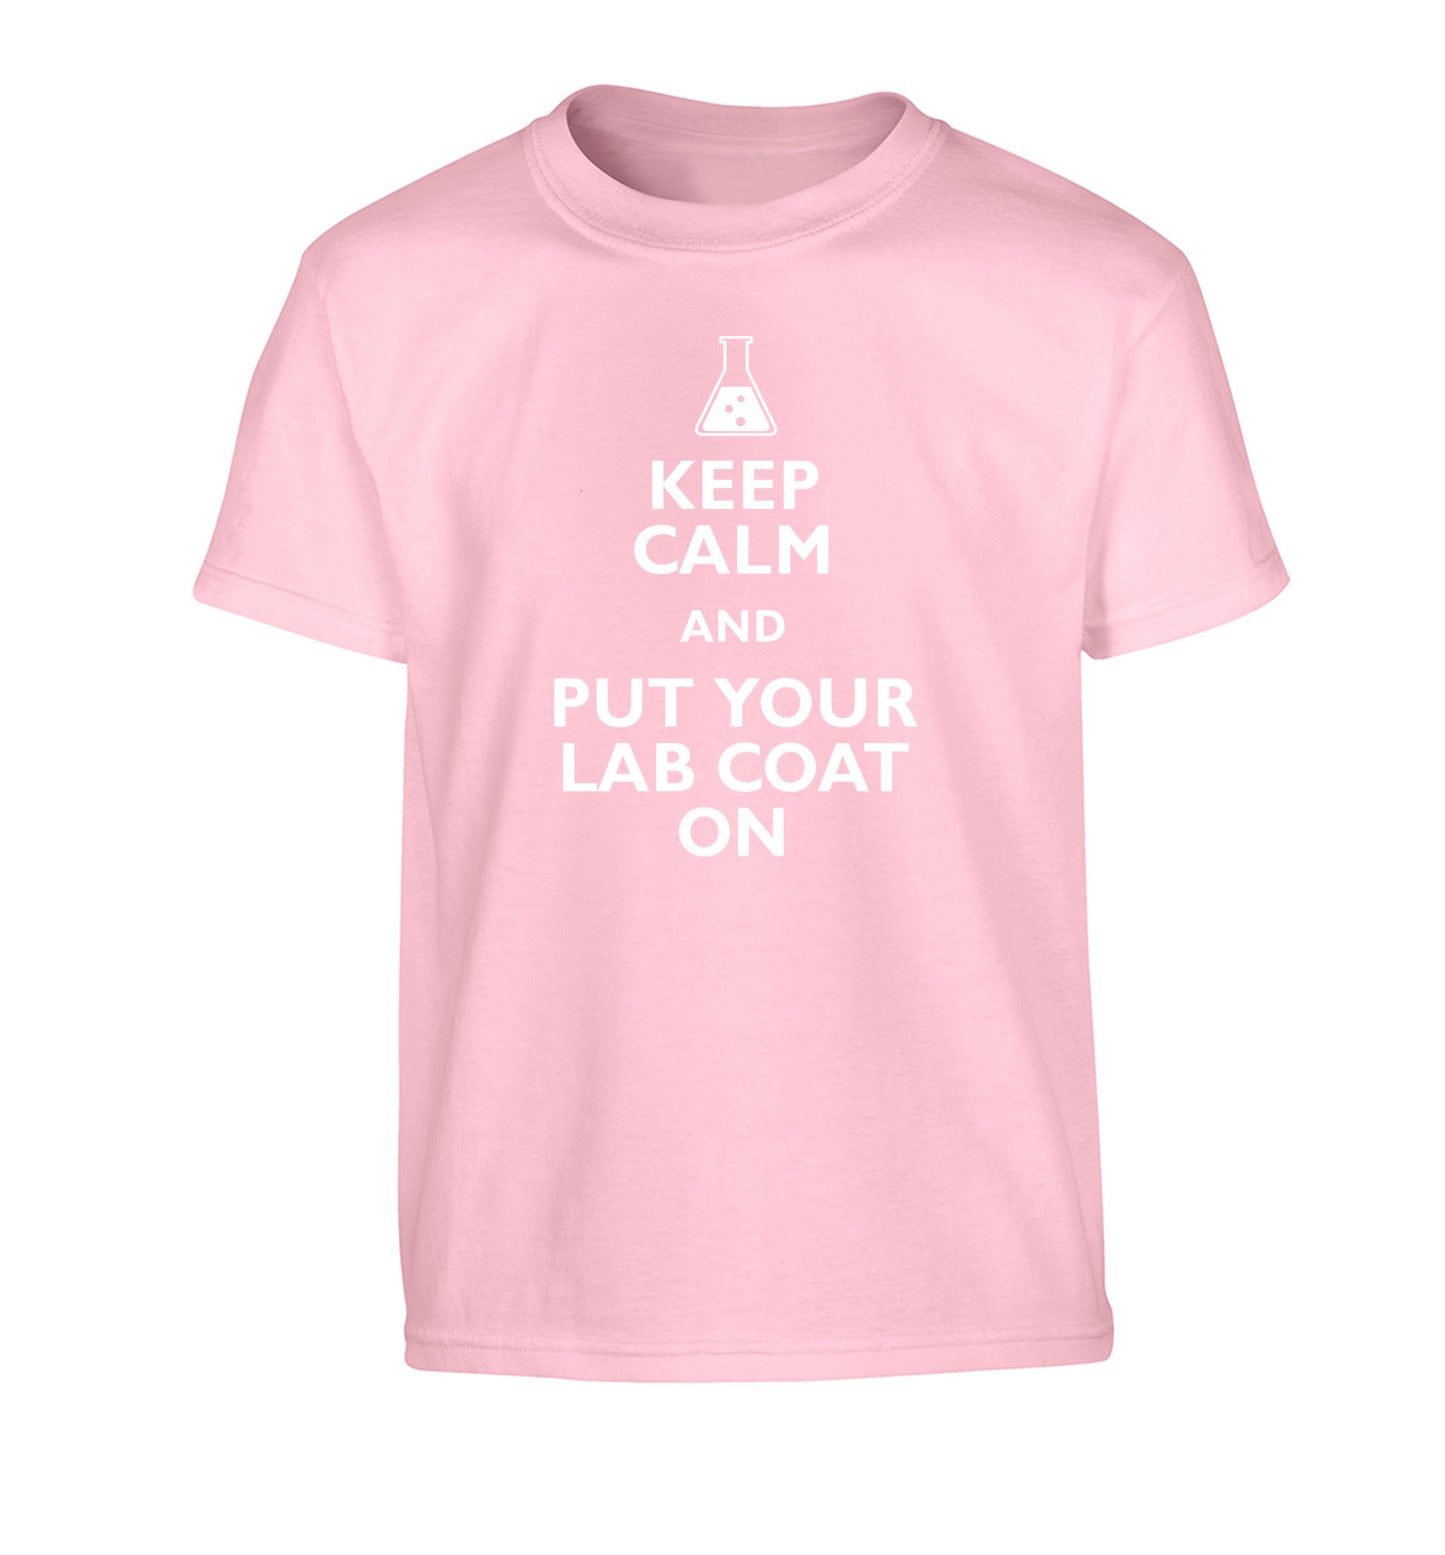 Keep calm and put your lab coat on Children's light pink Tshirt 12-14 Years